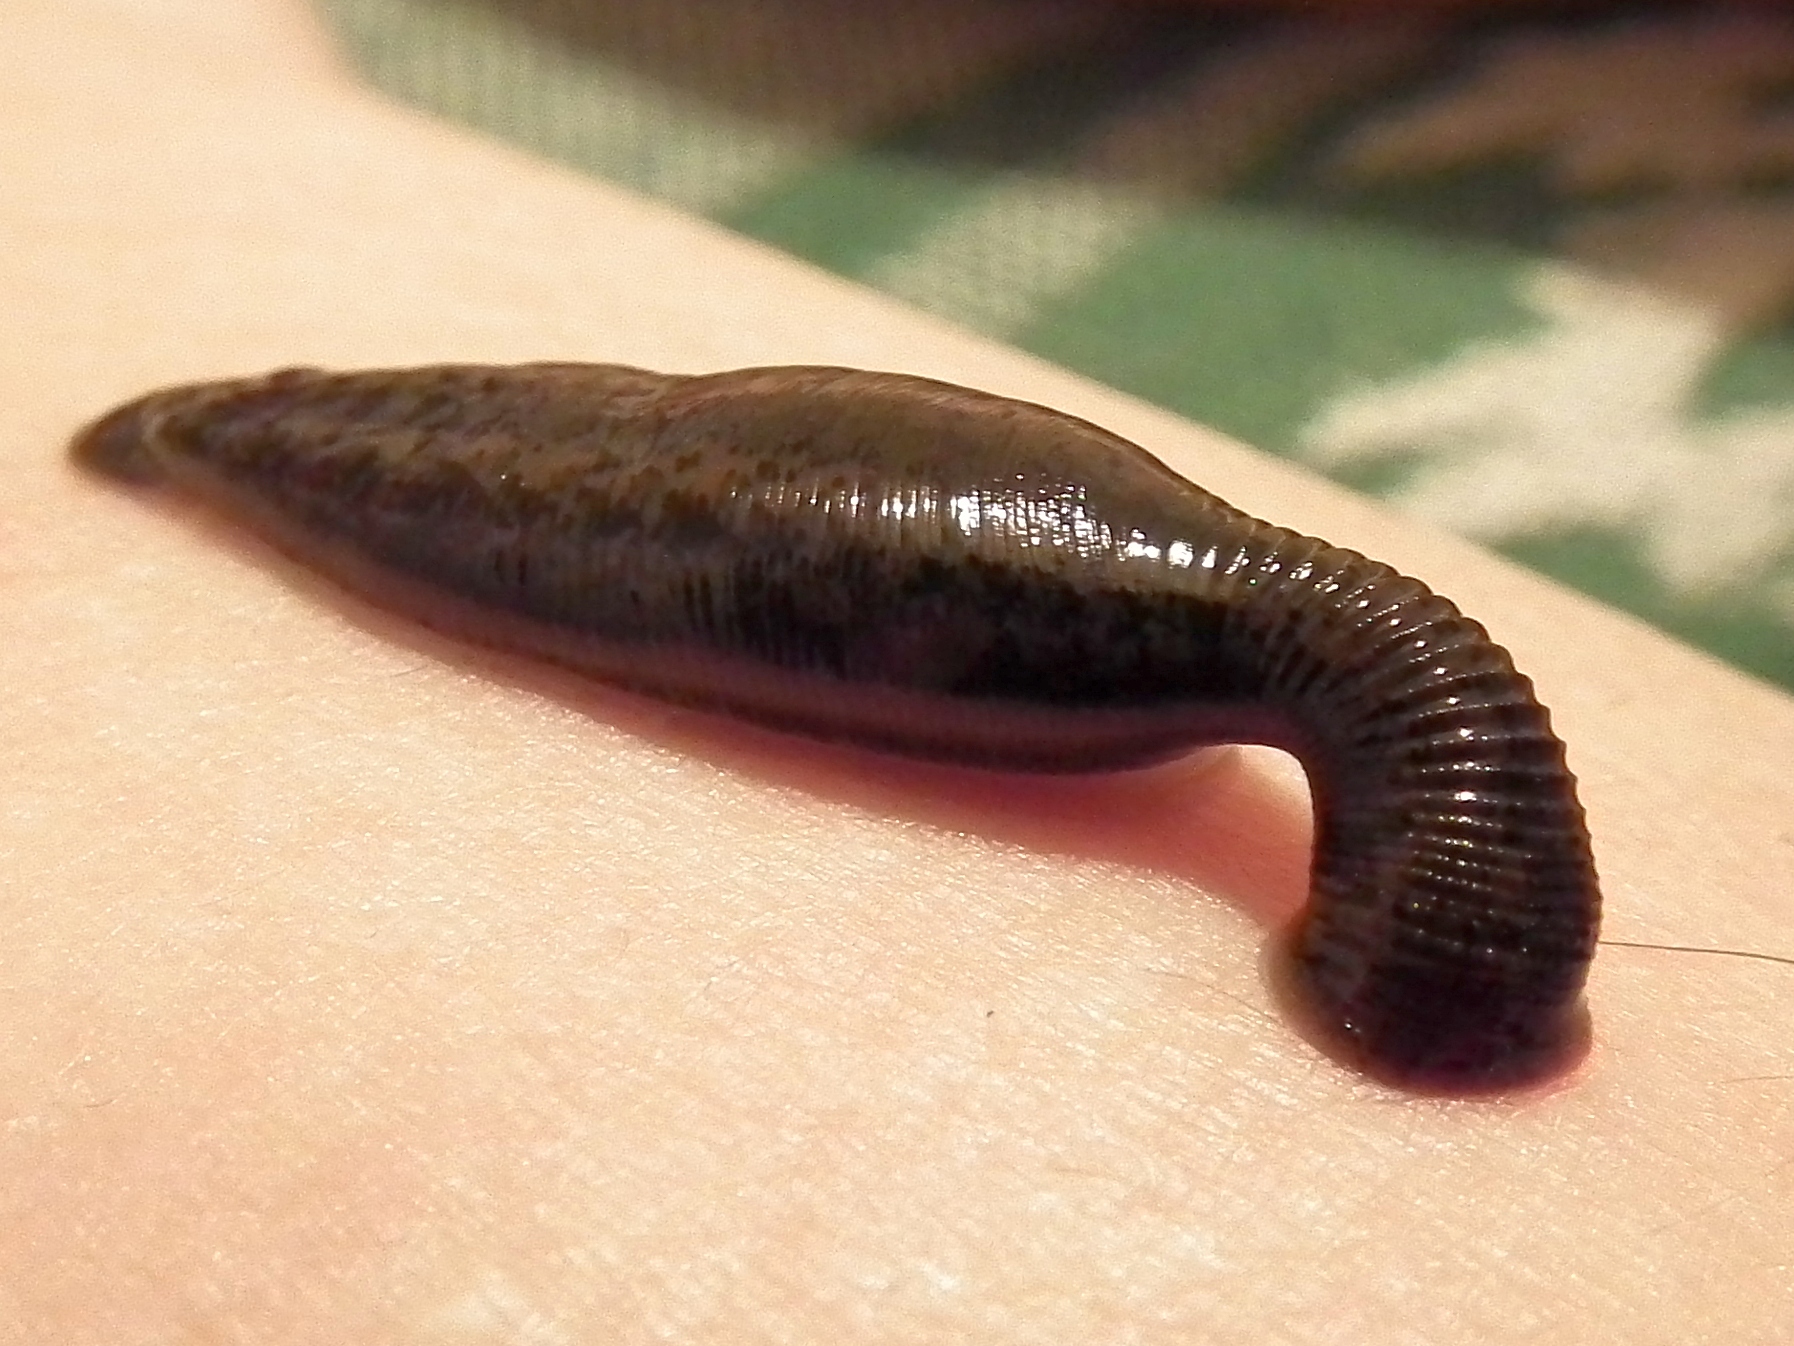 where does the word leech come from and what does leech mean